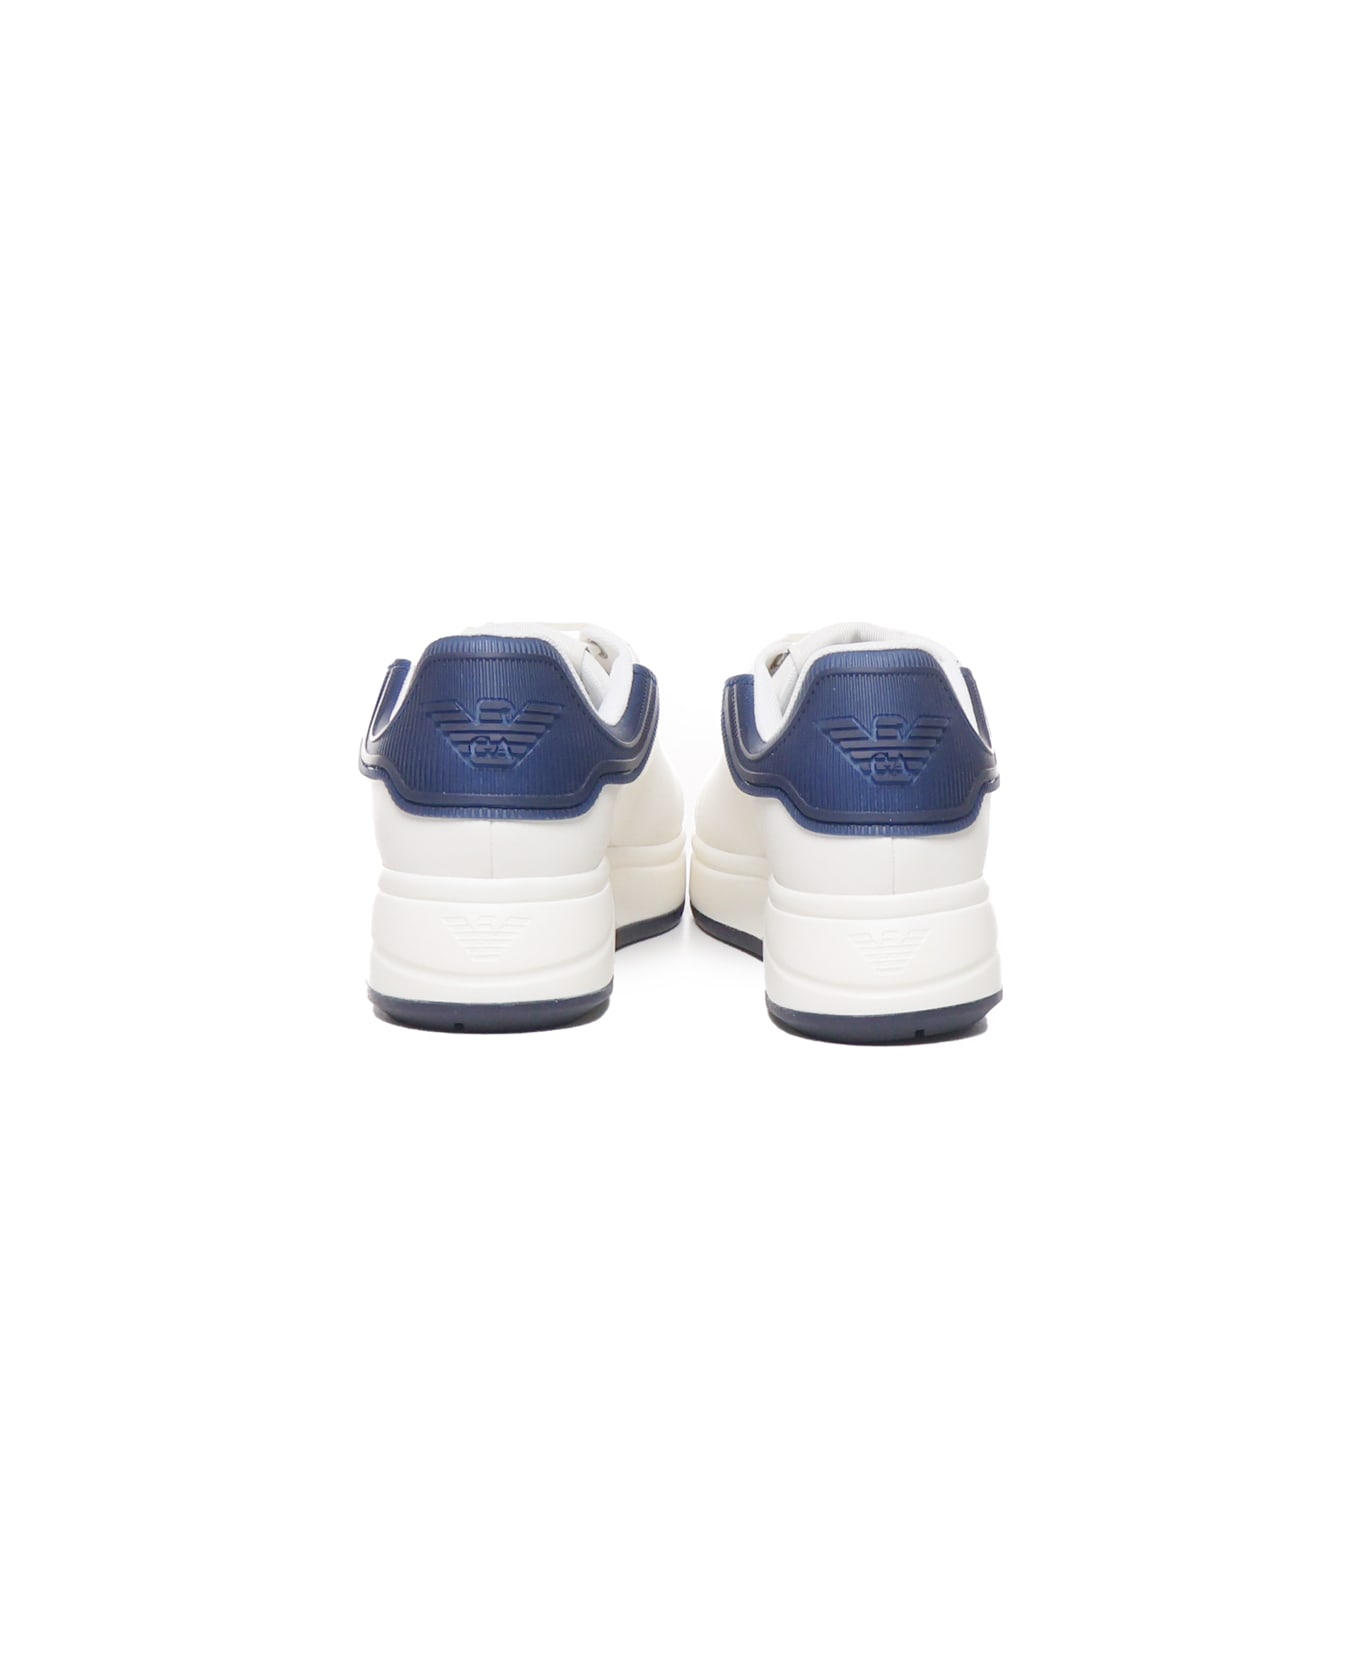 Emporio Armani Sneakers With Contrasting Rivet - Blue